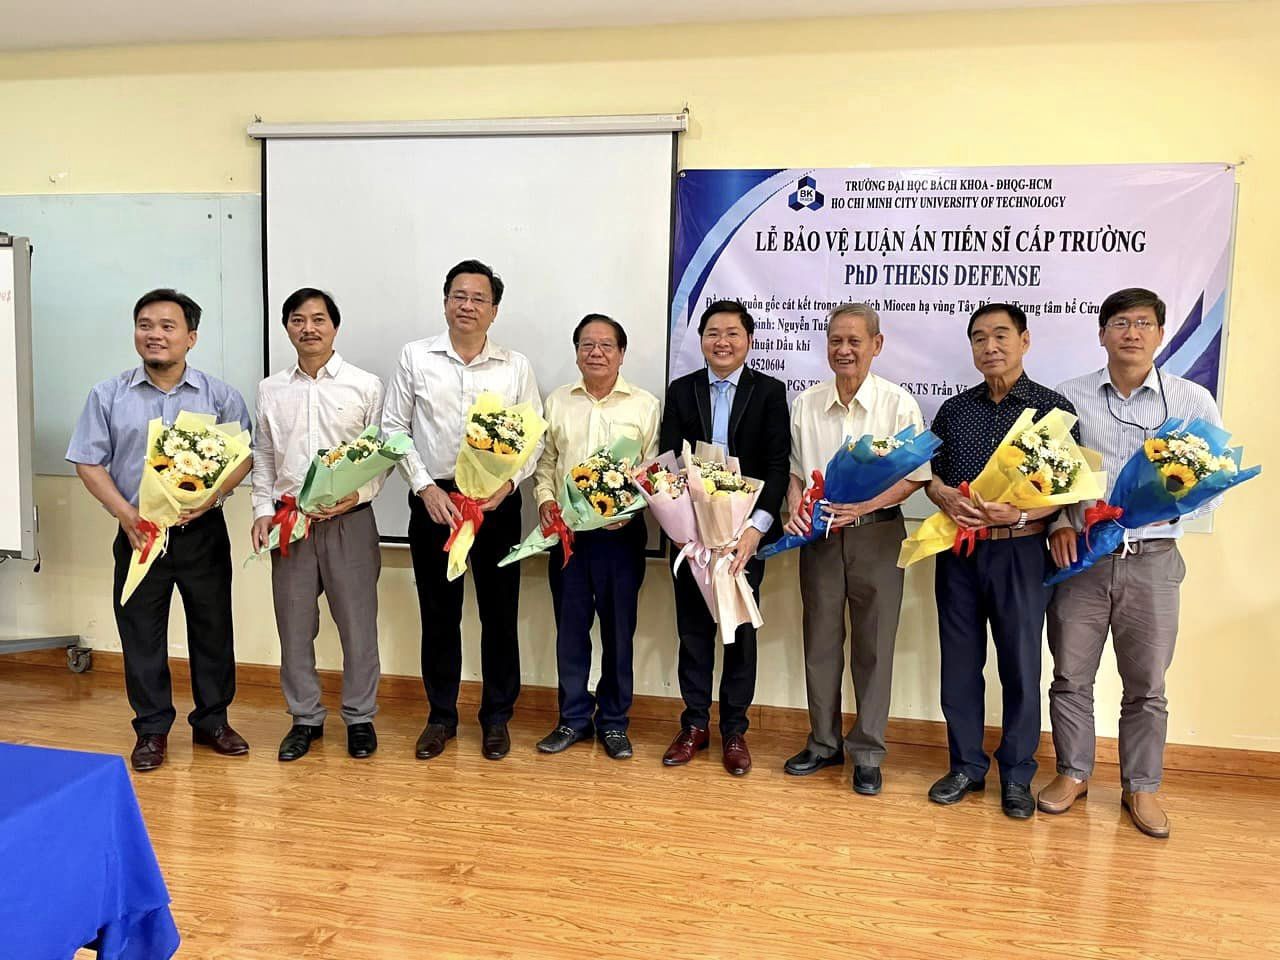 PhD candidate Nguyễn Tuấn successfully defended his doctoral dissertation at the university level